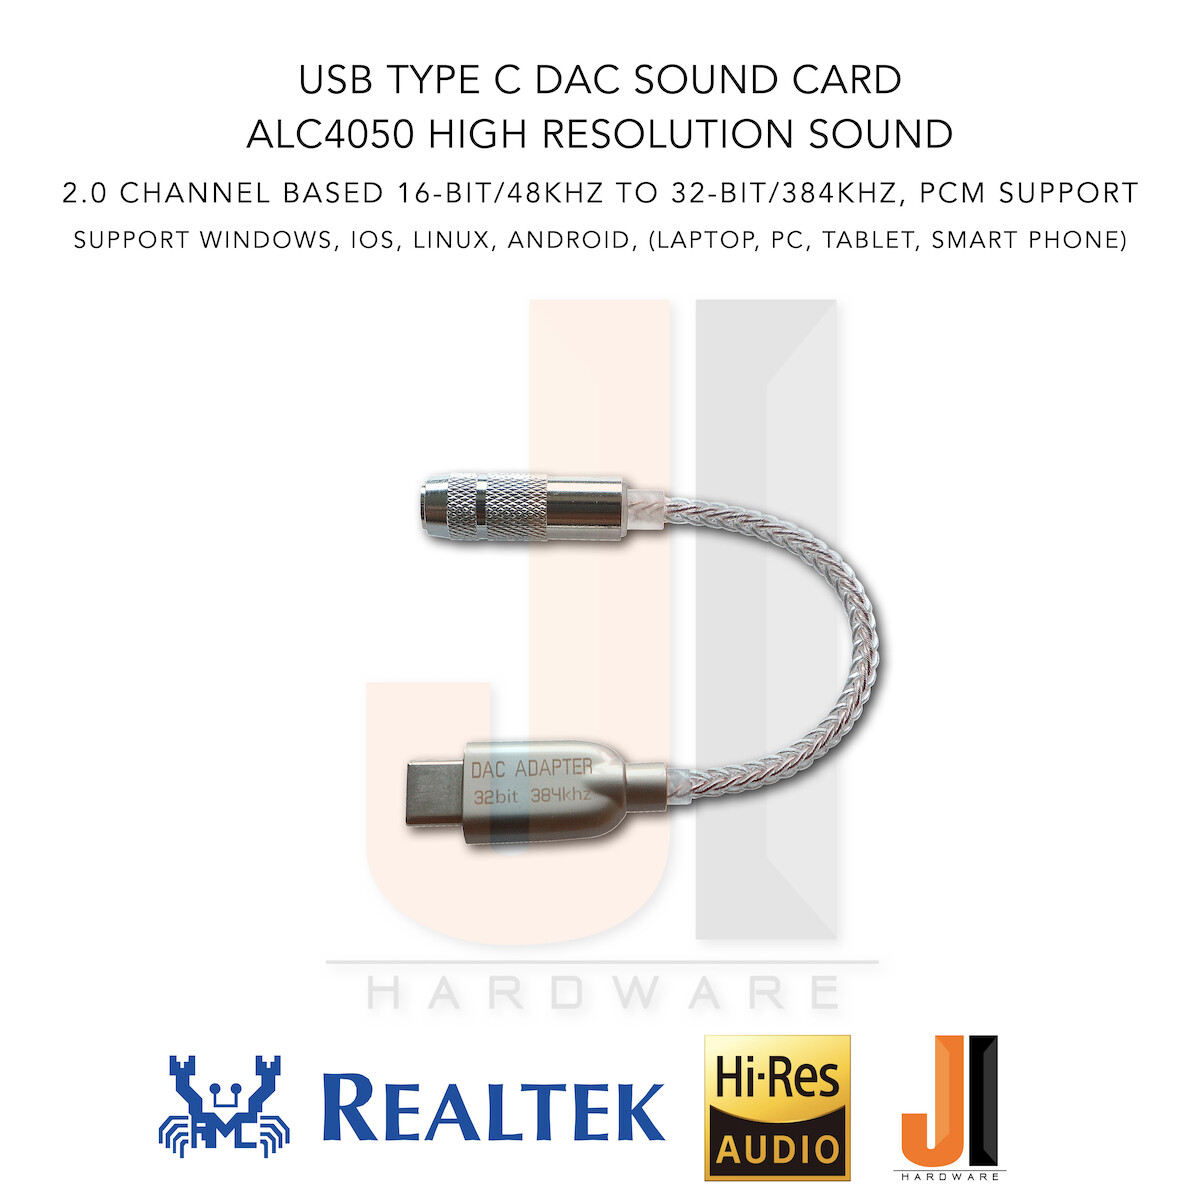 USB type C DAC sound card ALC4050 high resolution sound for PC, Tablet, Laptop, Smart Phone (Support iOS, Windows, Android) ของใหม่มีกล่องใส่